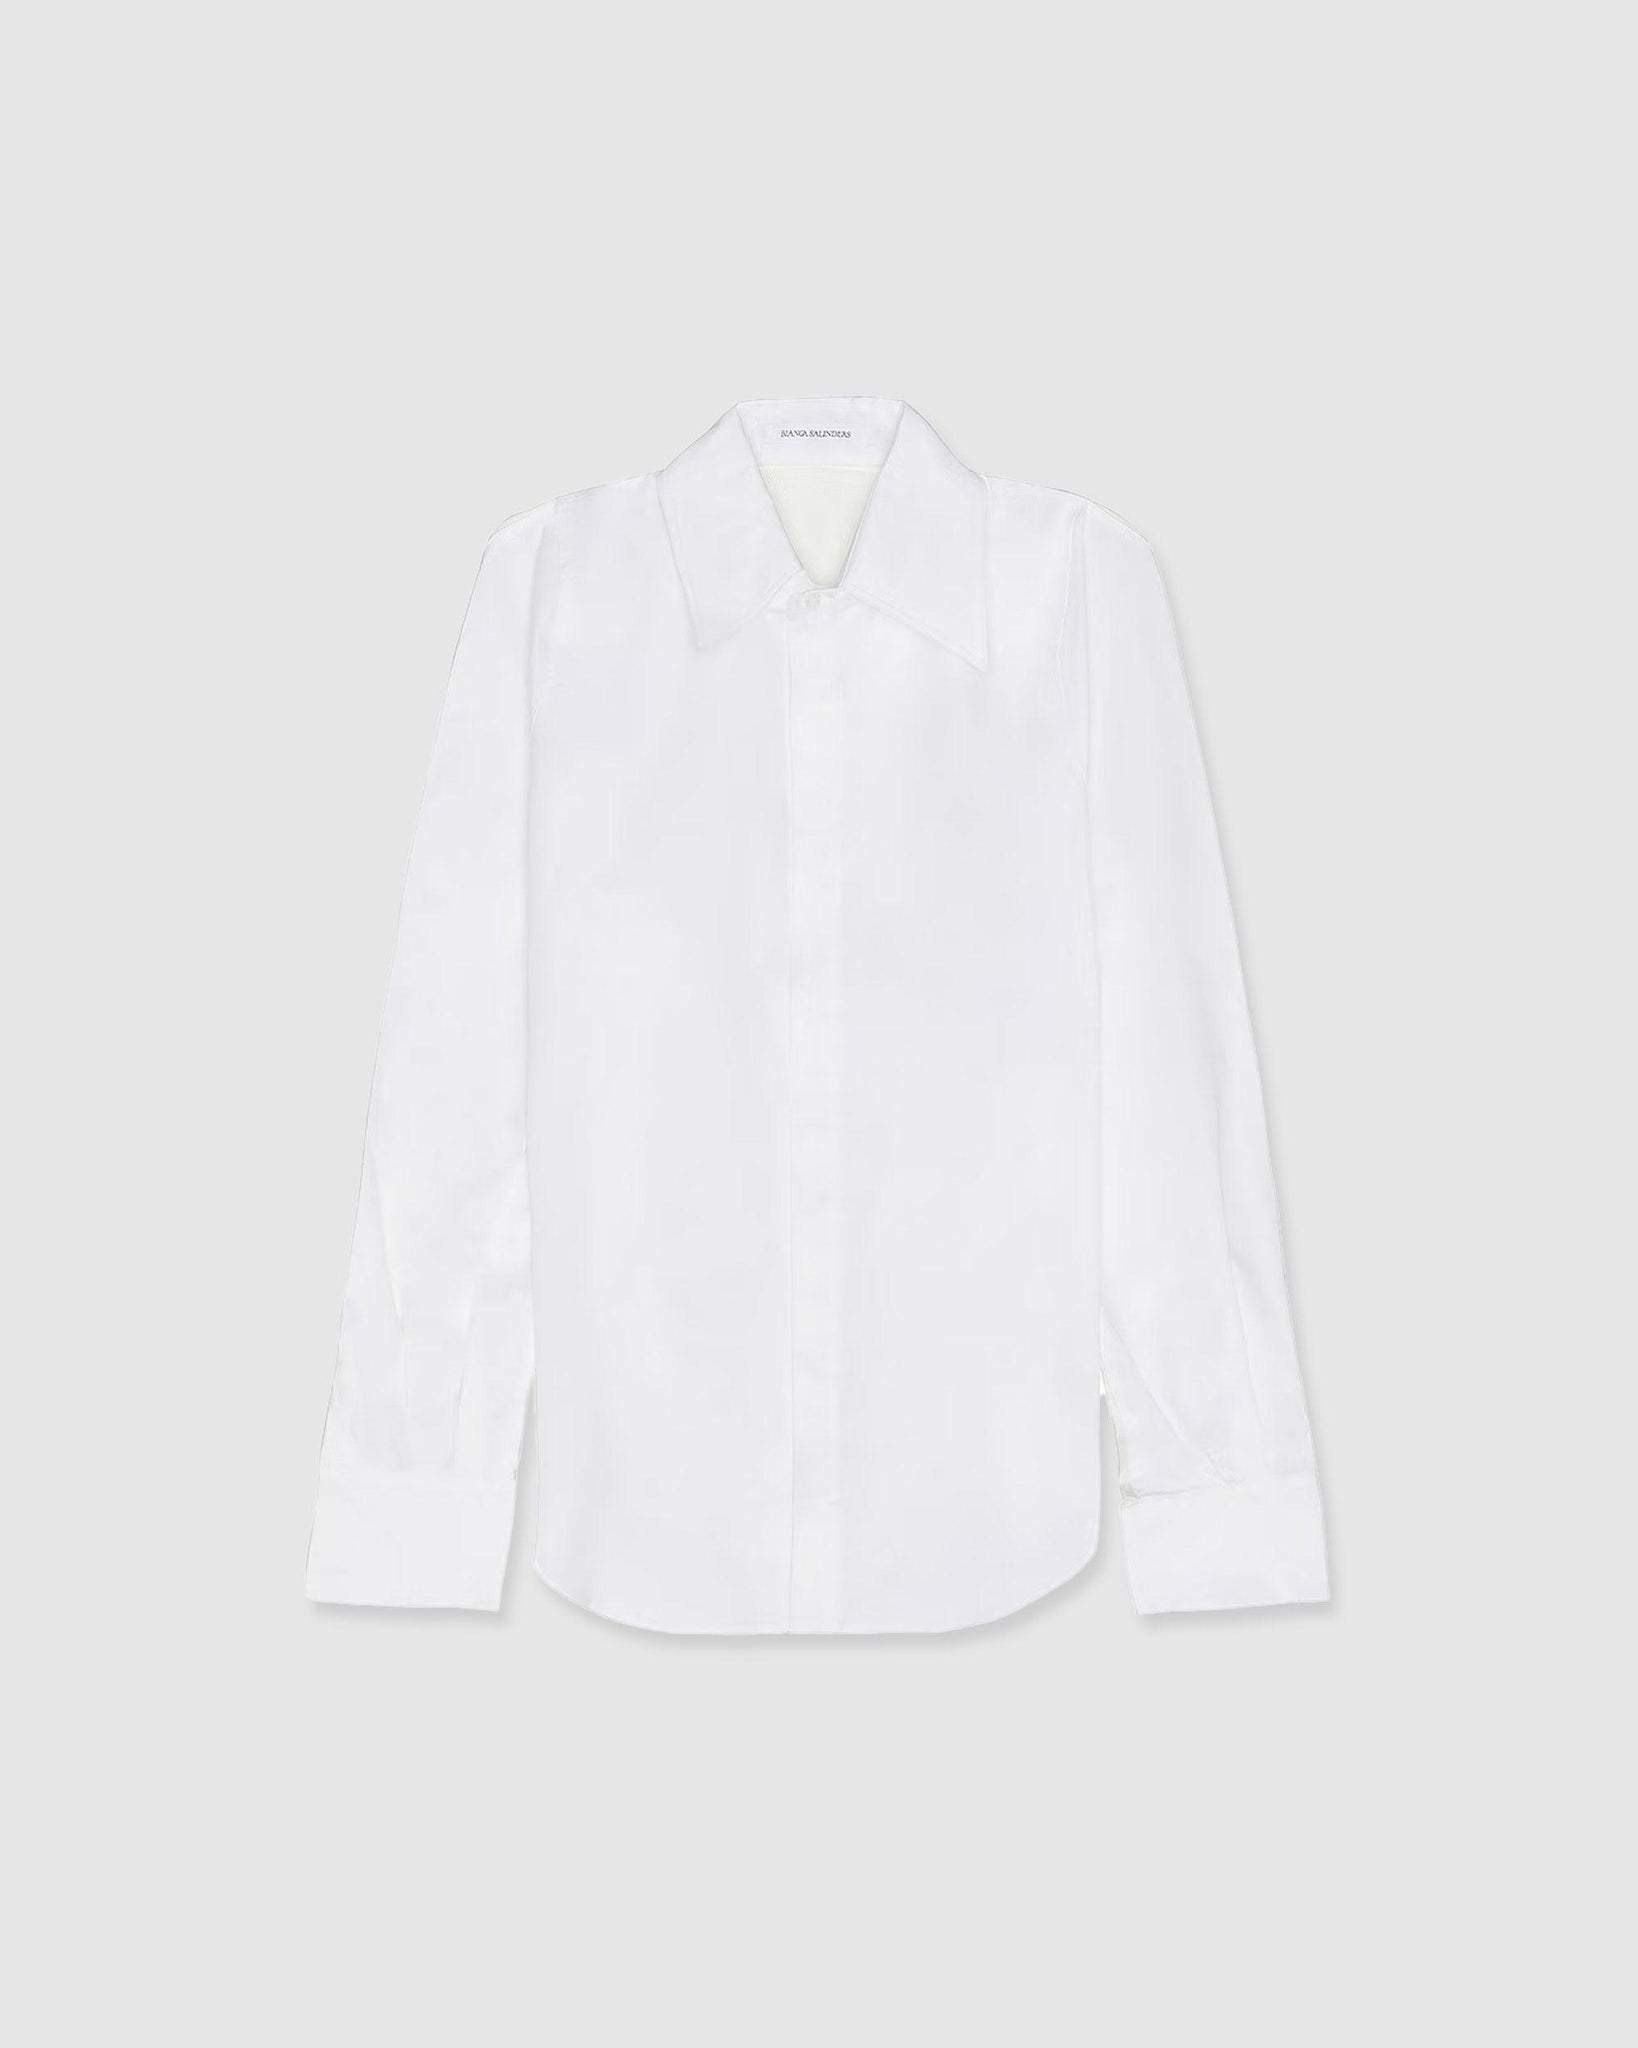 Row Back Shirt White - {{ collection.title }} - Chinatown Country Club 